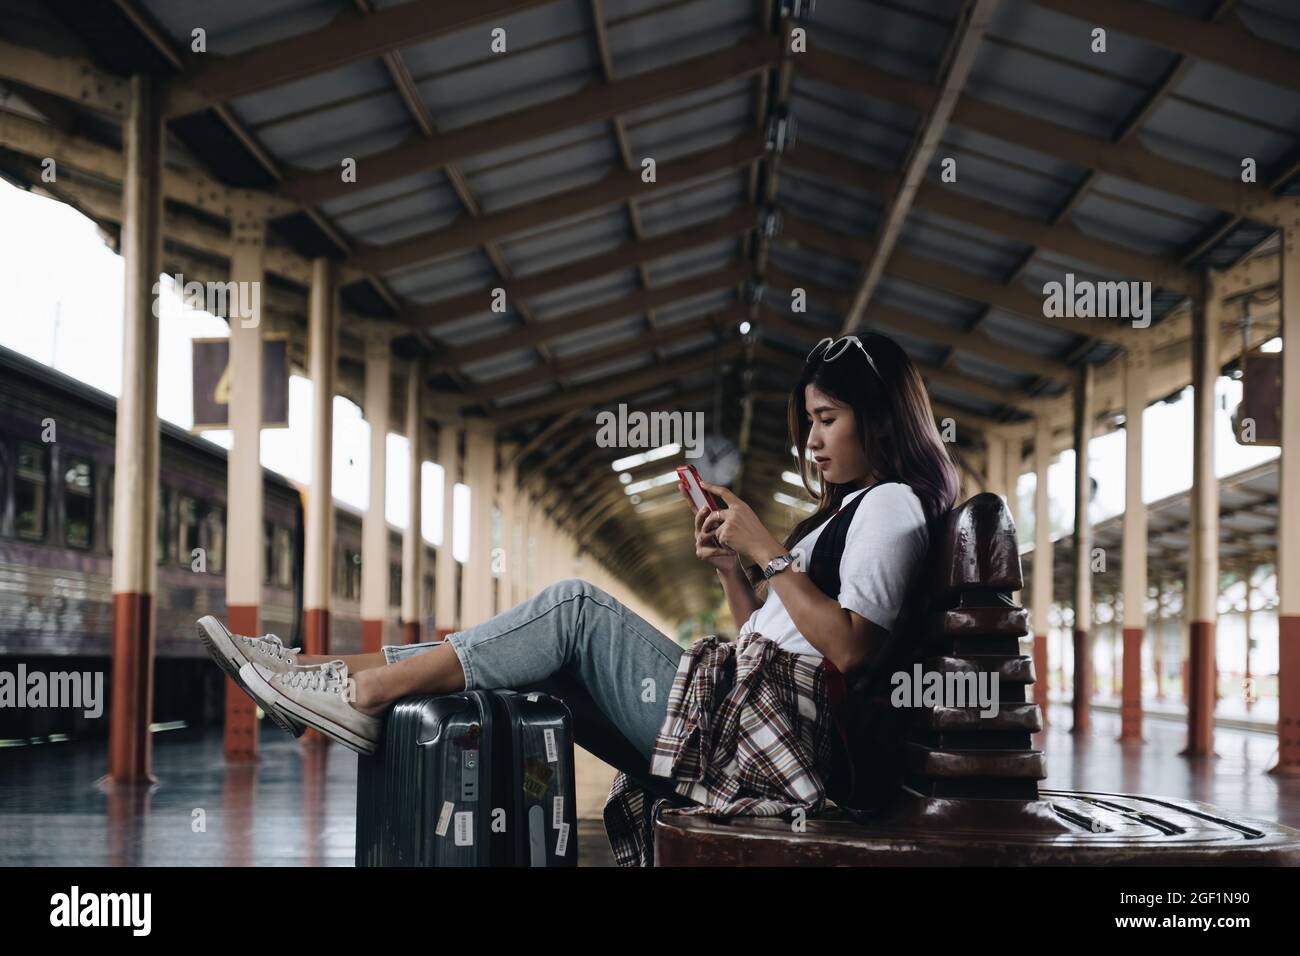 Image of A traveler checking message from her friend and waiting at train station. Travel concept Stock Photo